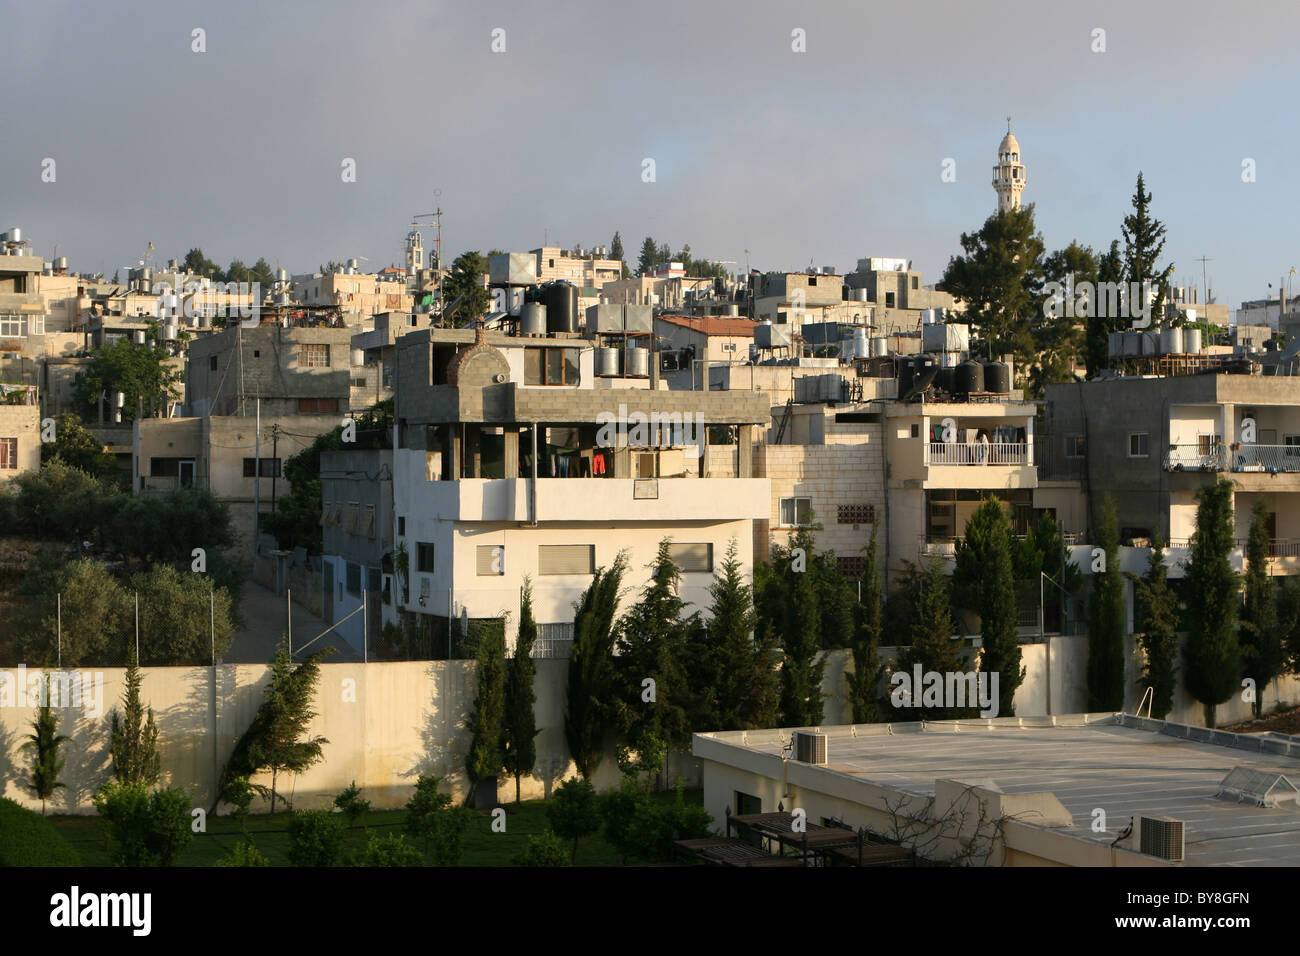 Multistory homes of Palestinians rise compactly across this hilltop in Bethlehem, Israel. A multitude of solar water heaters sit Stock Photo